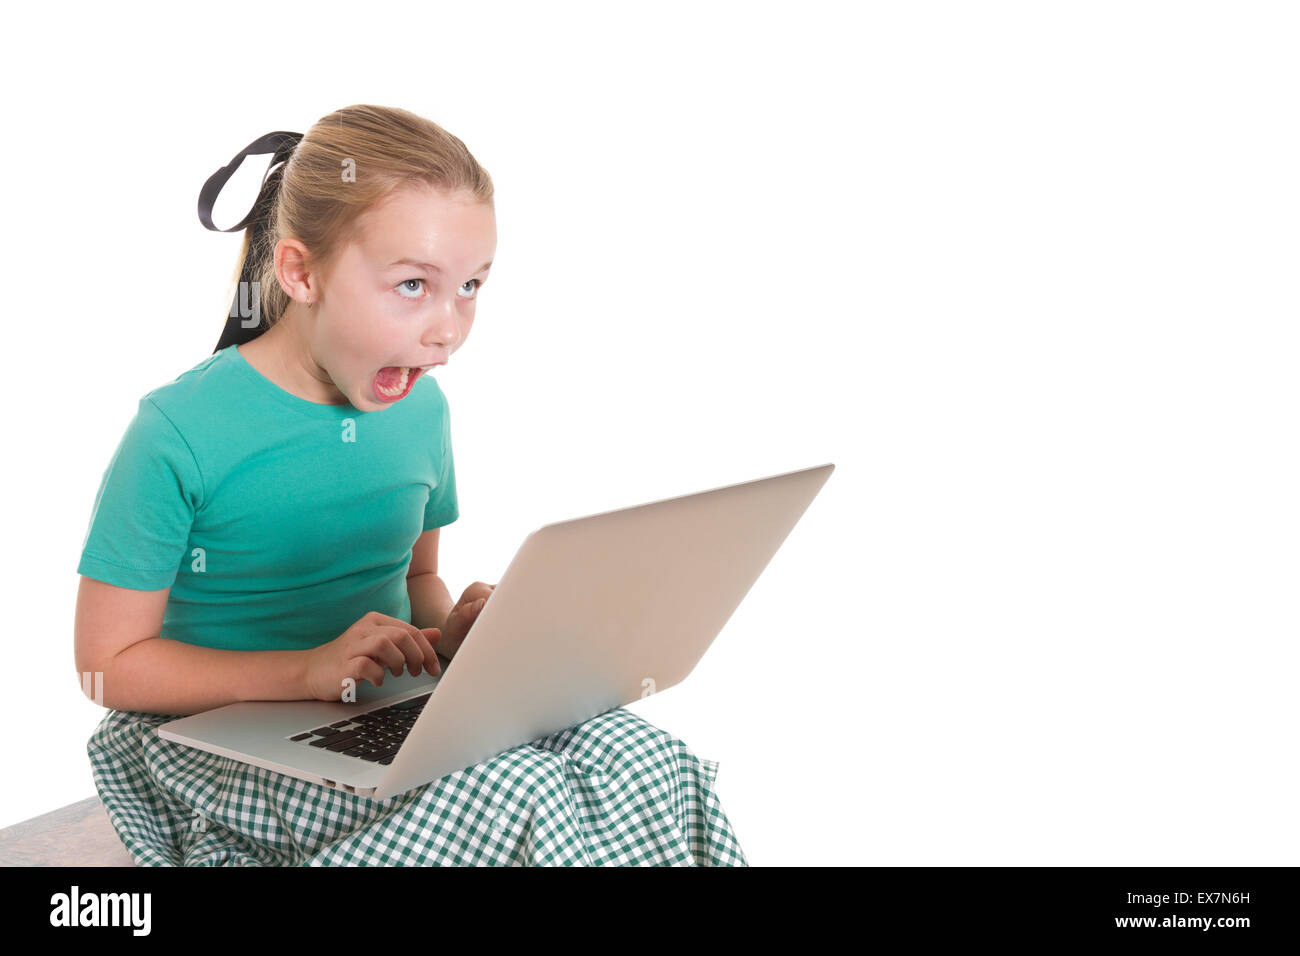 Young girl with a computer on her lap, looking totally amazed and shocked by what she is looking at. Stock Photo